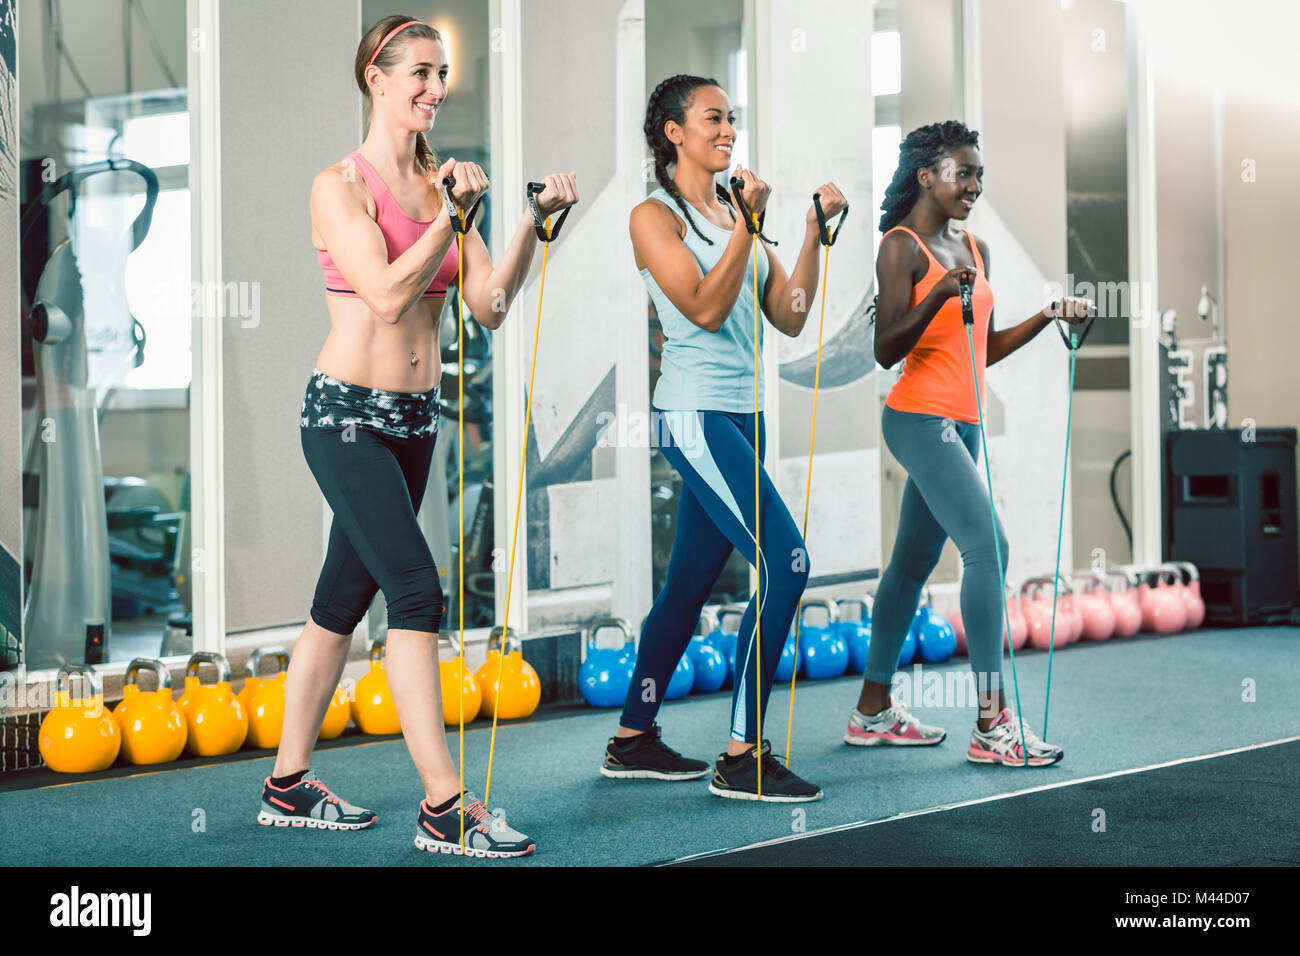 Full length of three fit women exercising with resistance bands  Stock Photo